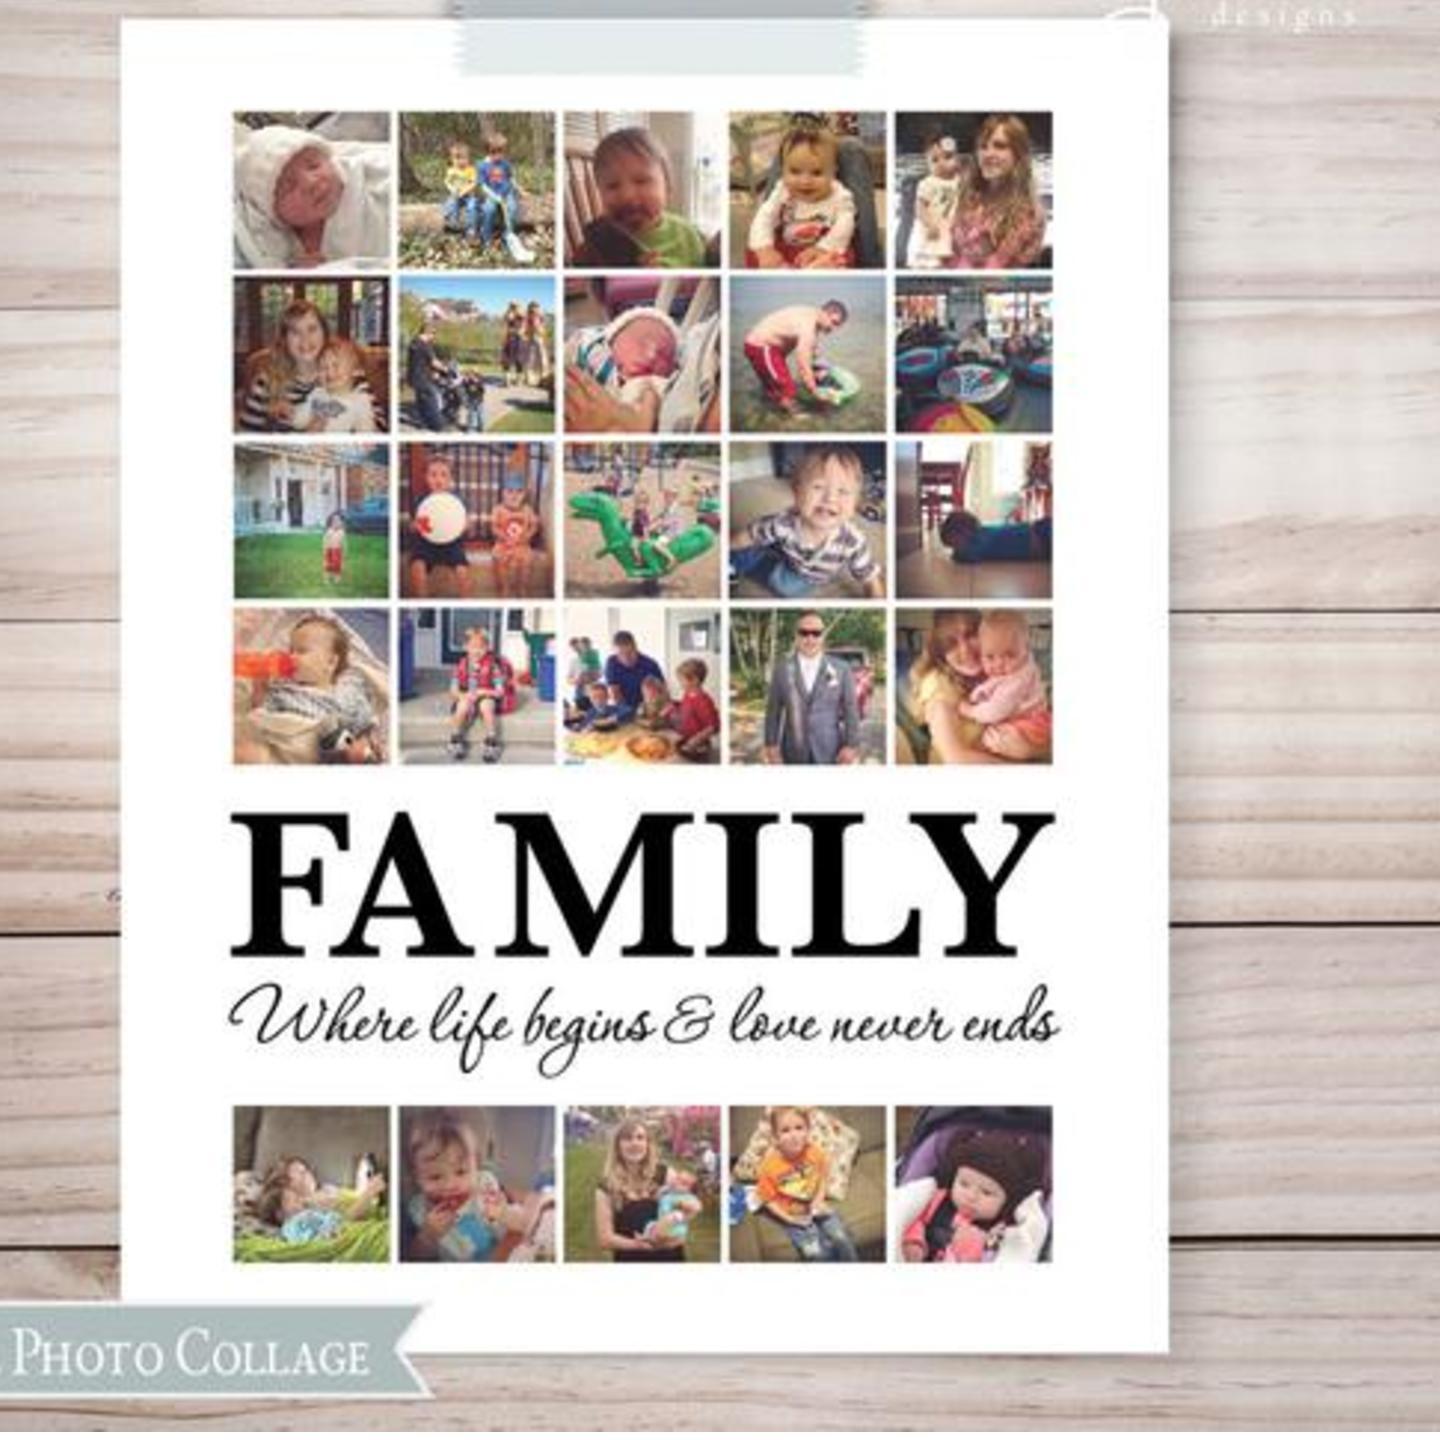 Personalize Family Collage  8x12 inches, Black Frame , With your Photos and quotes